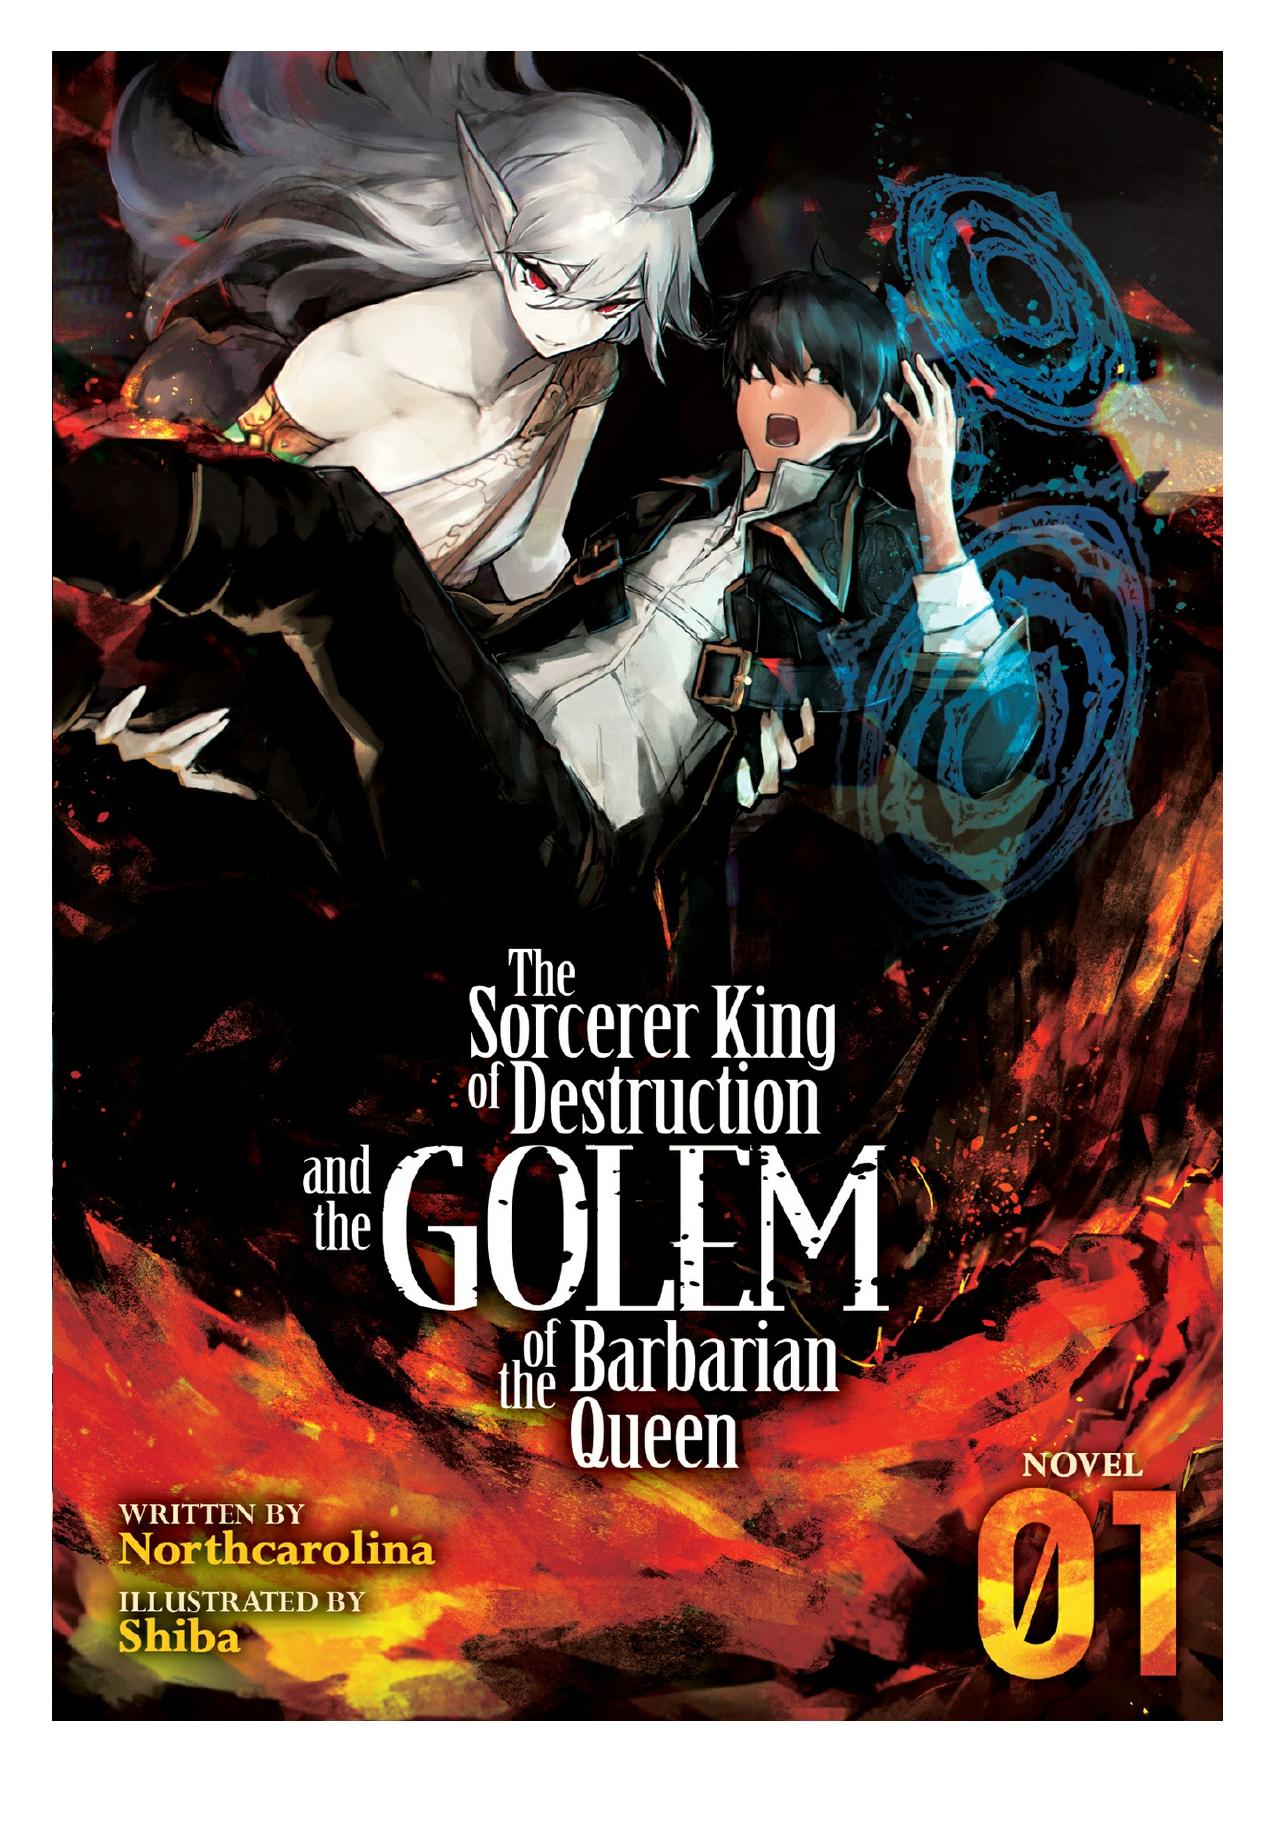 The Sorcerer King of Destruction and the Golem of the Barbarian Queen (Light Novel) Vol. 1 by Northcarolina